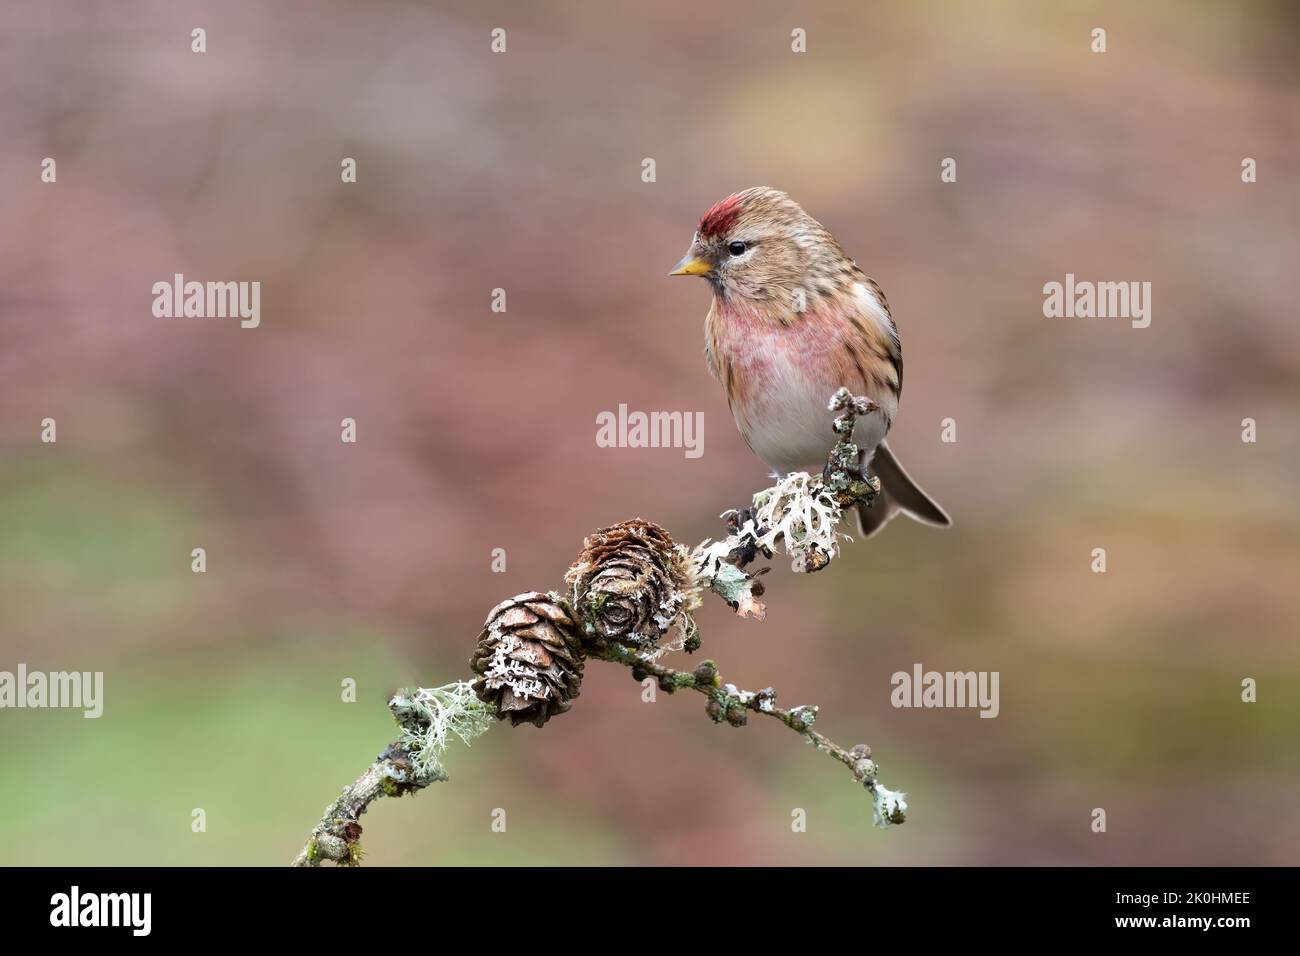 A portrait of a common redpoll, Acanthis flammea, as it perched on a lichen covered branch Stock Photo